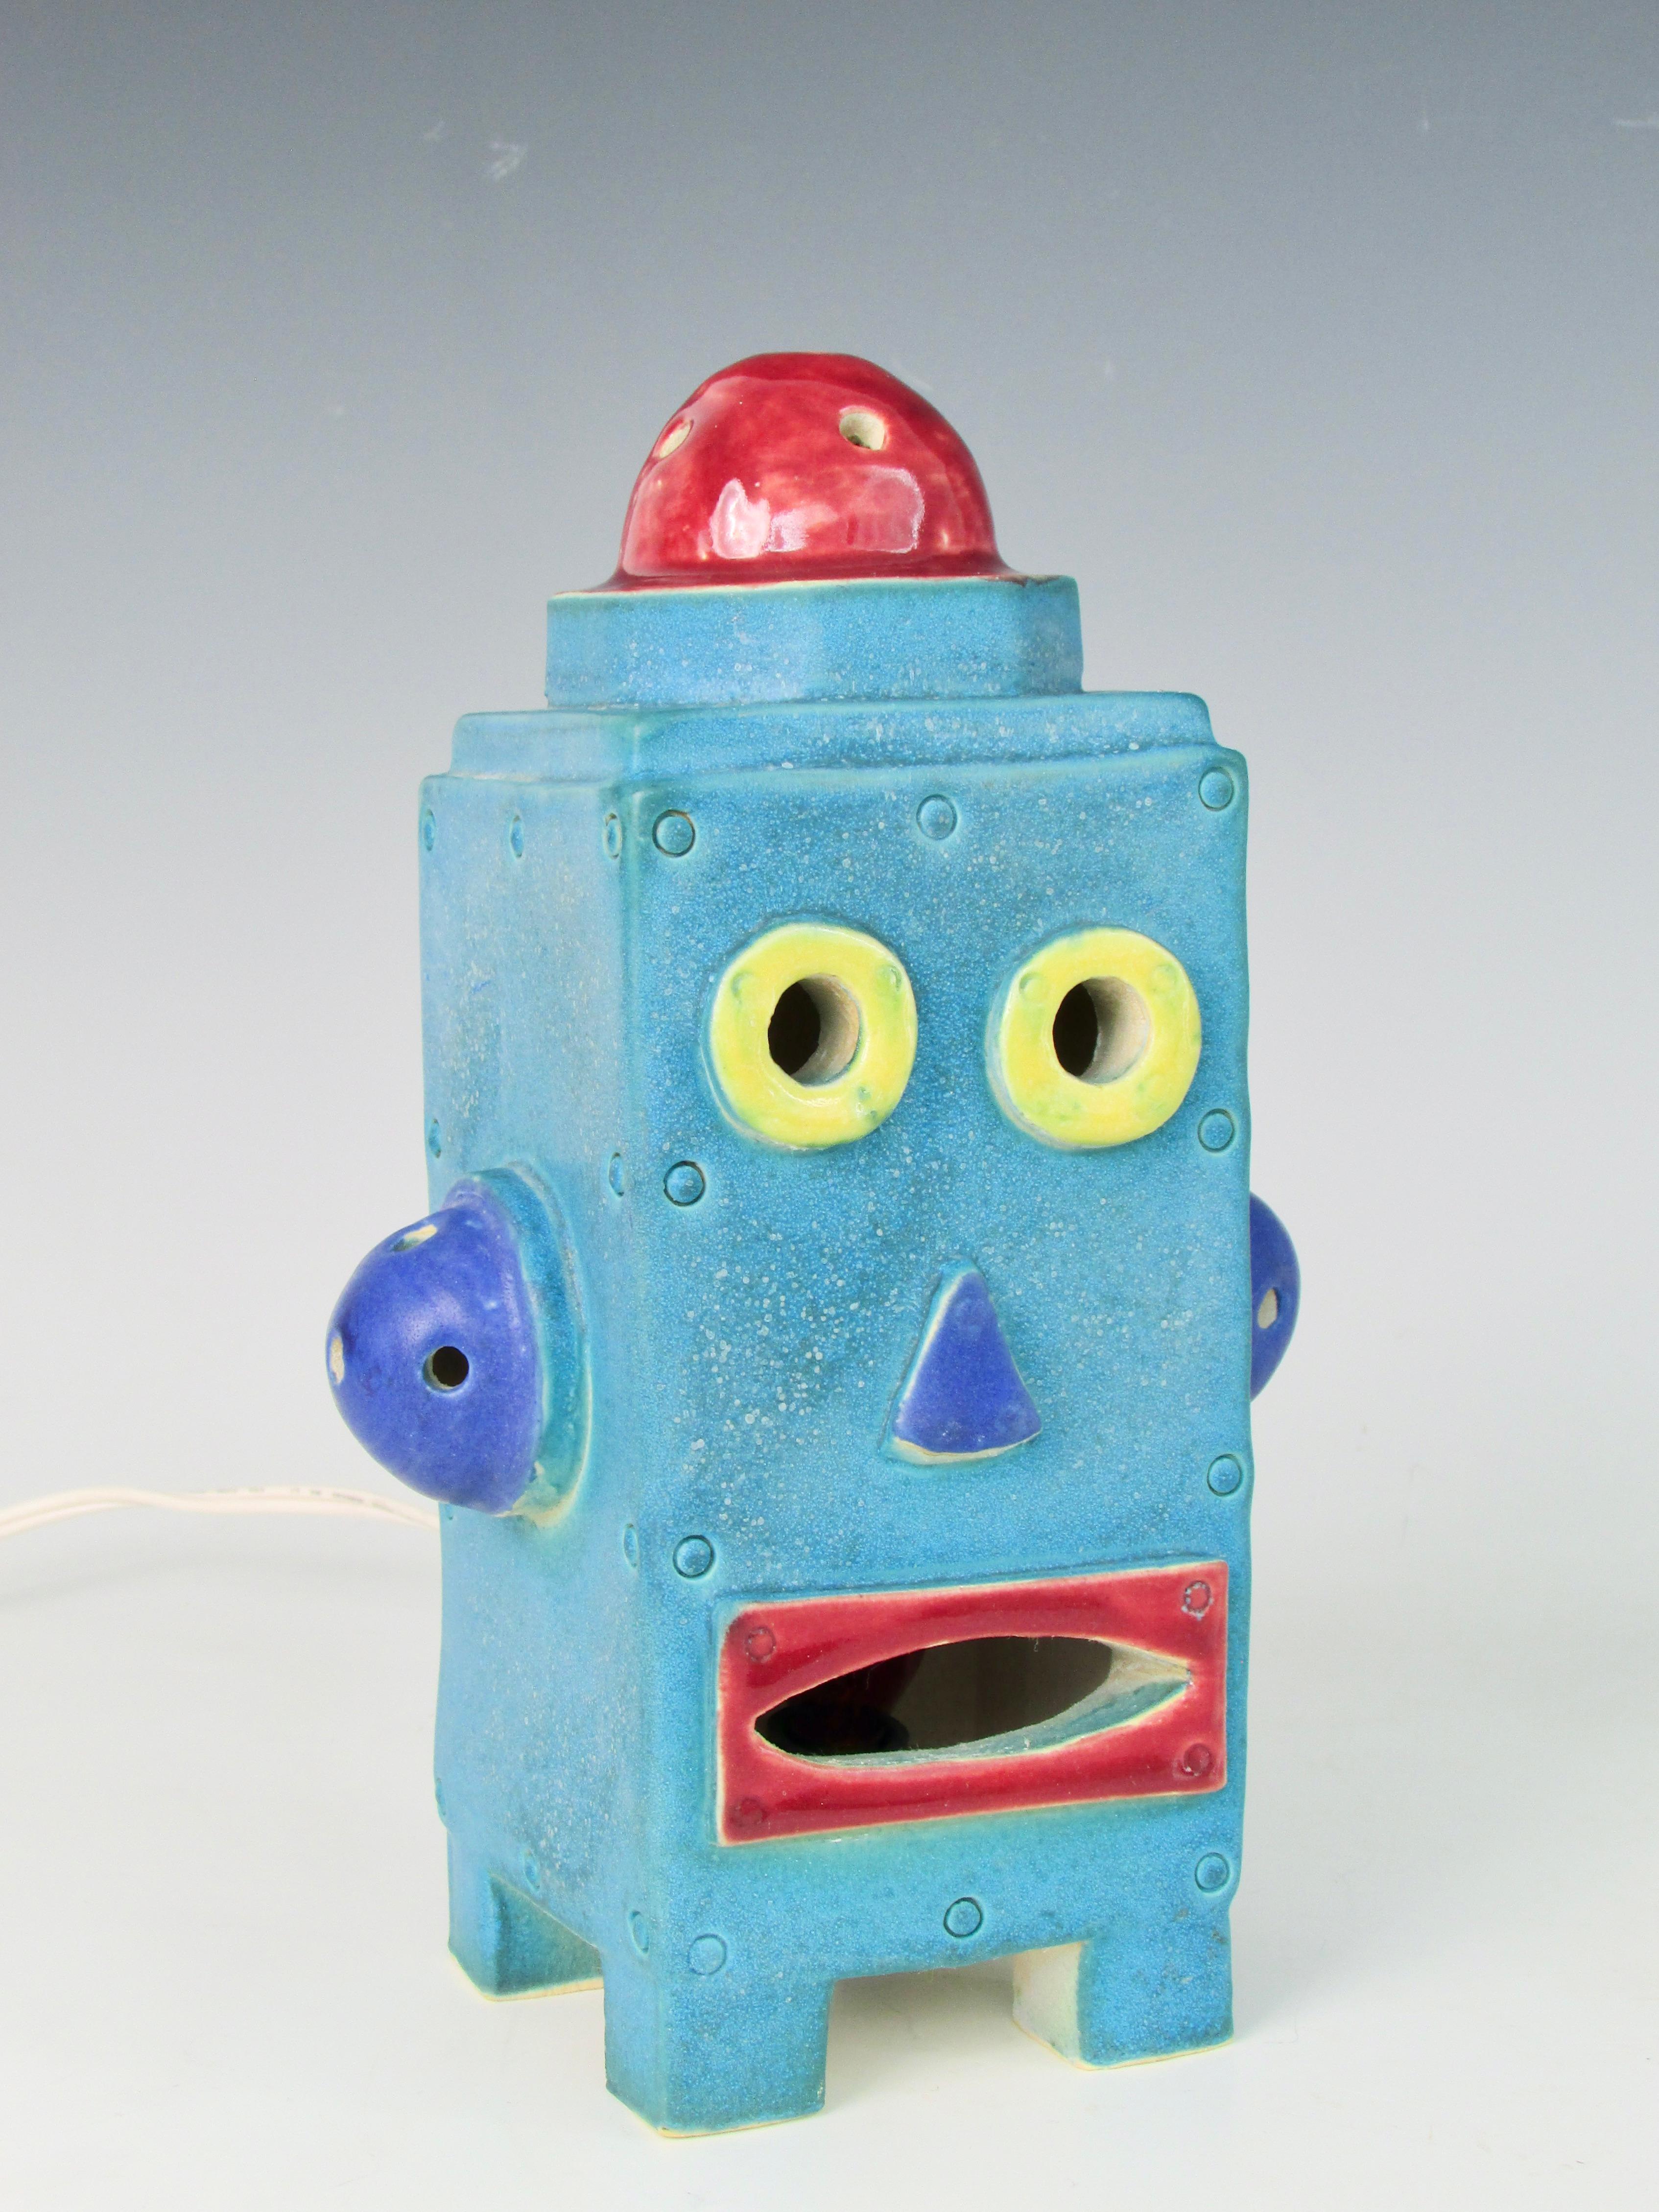 Detroit Artist Doug Spalding Light Up Pottery Robot In Good Condition For Sale In Ferndale, MI